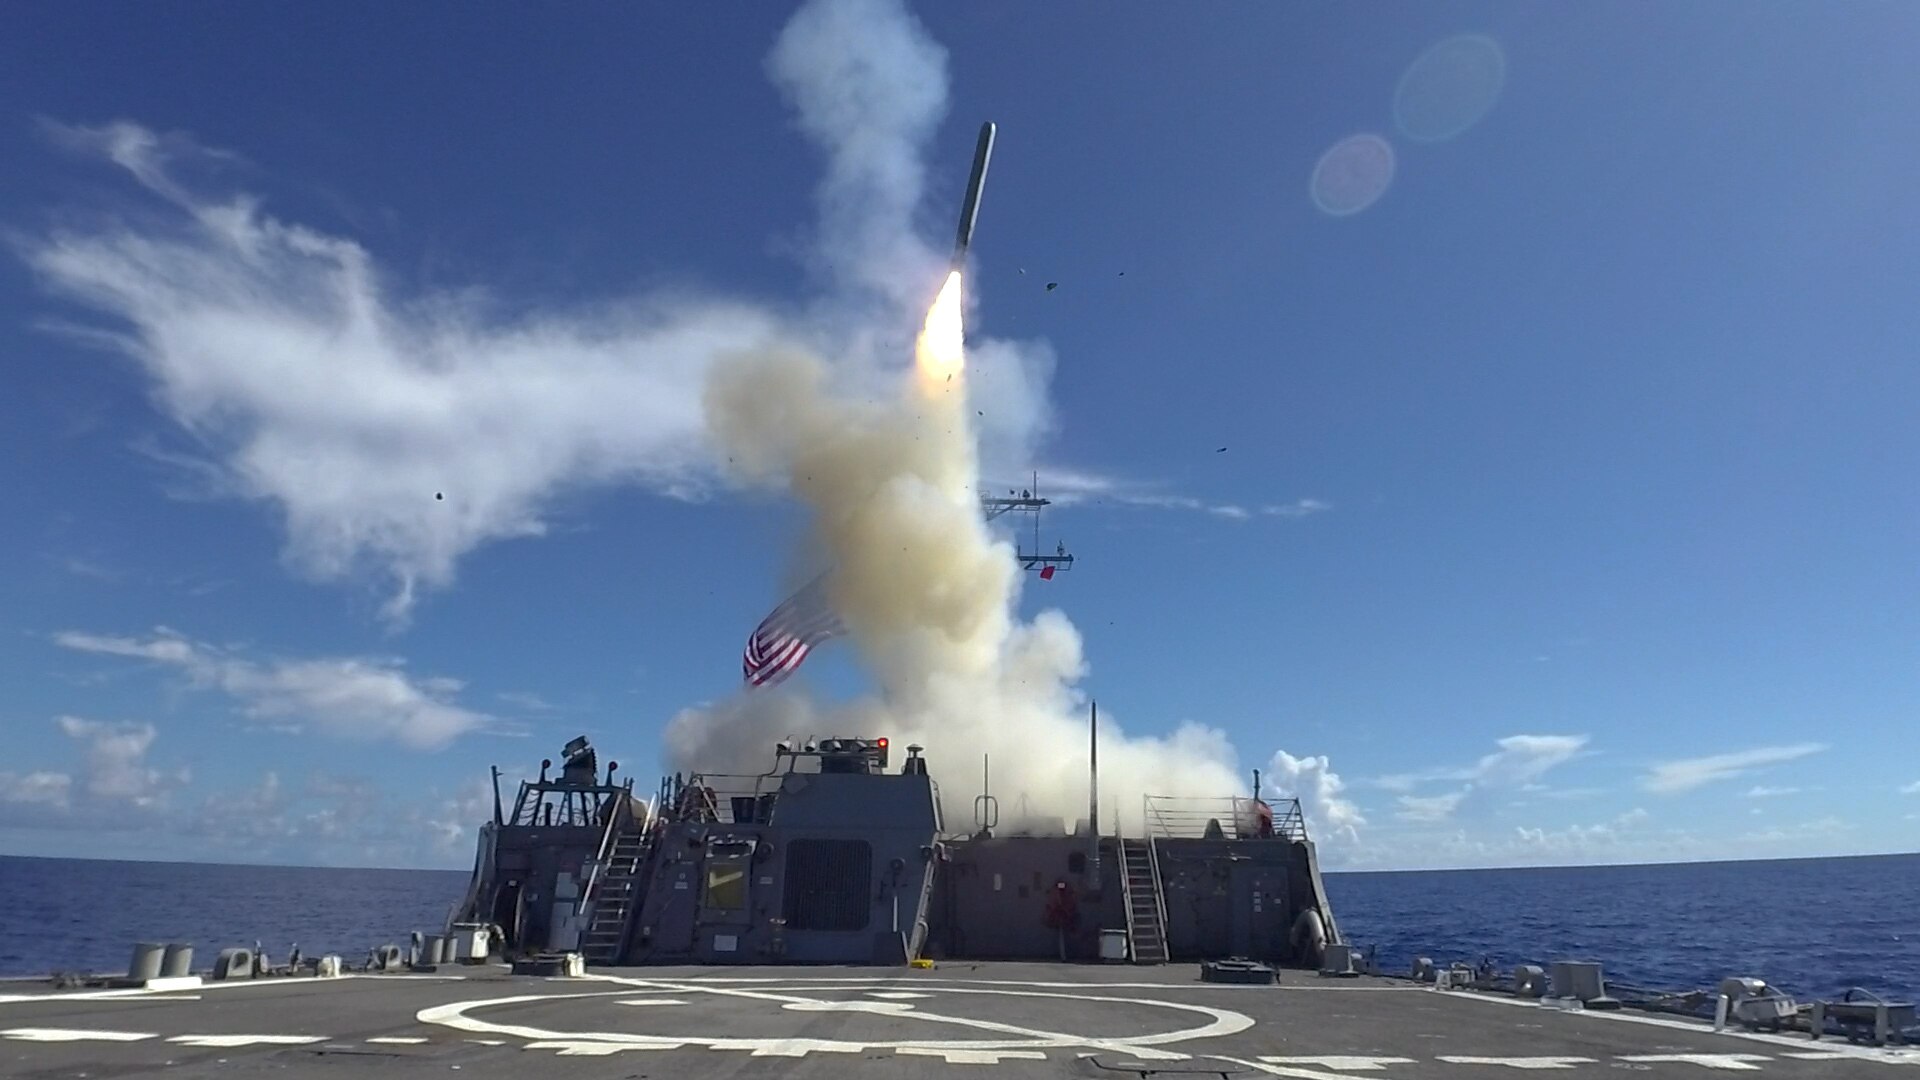 IMAGE: A Tomahawk land attack missile is launched from the Arleigh Burke-class guided-missile destroyer USS Curtis Wilbur (DDG 54) during a May 2019 live-fire demonstration. Naval Surface Warfare Center Dahlgren Division (NSWCDD) institutionalized its Technical Excellence Framework to make a difference in the Fleet in terms of capability, quality, security and safety of warfare mission critical products – including system development and products supporting the Tomahawk land attack missile – the command announced, Aug. 13, 2019. Dahlgren’s Technical Excellence Framework - a set of project execution requirements, training, internal project reviews, technical excellence metrics and data-driven continuous improvement - applies to all NSWCDD technical programs and projects. Over the course of seven years, the command’s Chief Engineer Council worked to achieve their vision of institutionalizing technical excellence, rigor and discipline in order to meet the primary goal of consistently and efficiently developing safe, secure, reliable, maintainable, and high-quality products and systems.